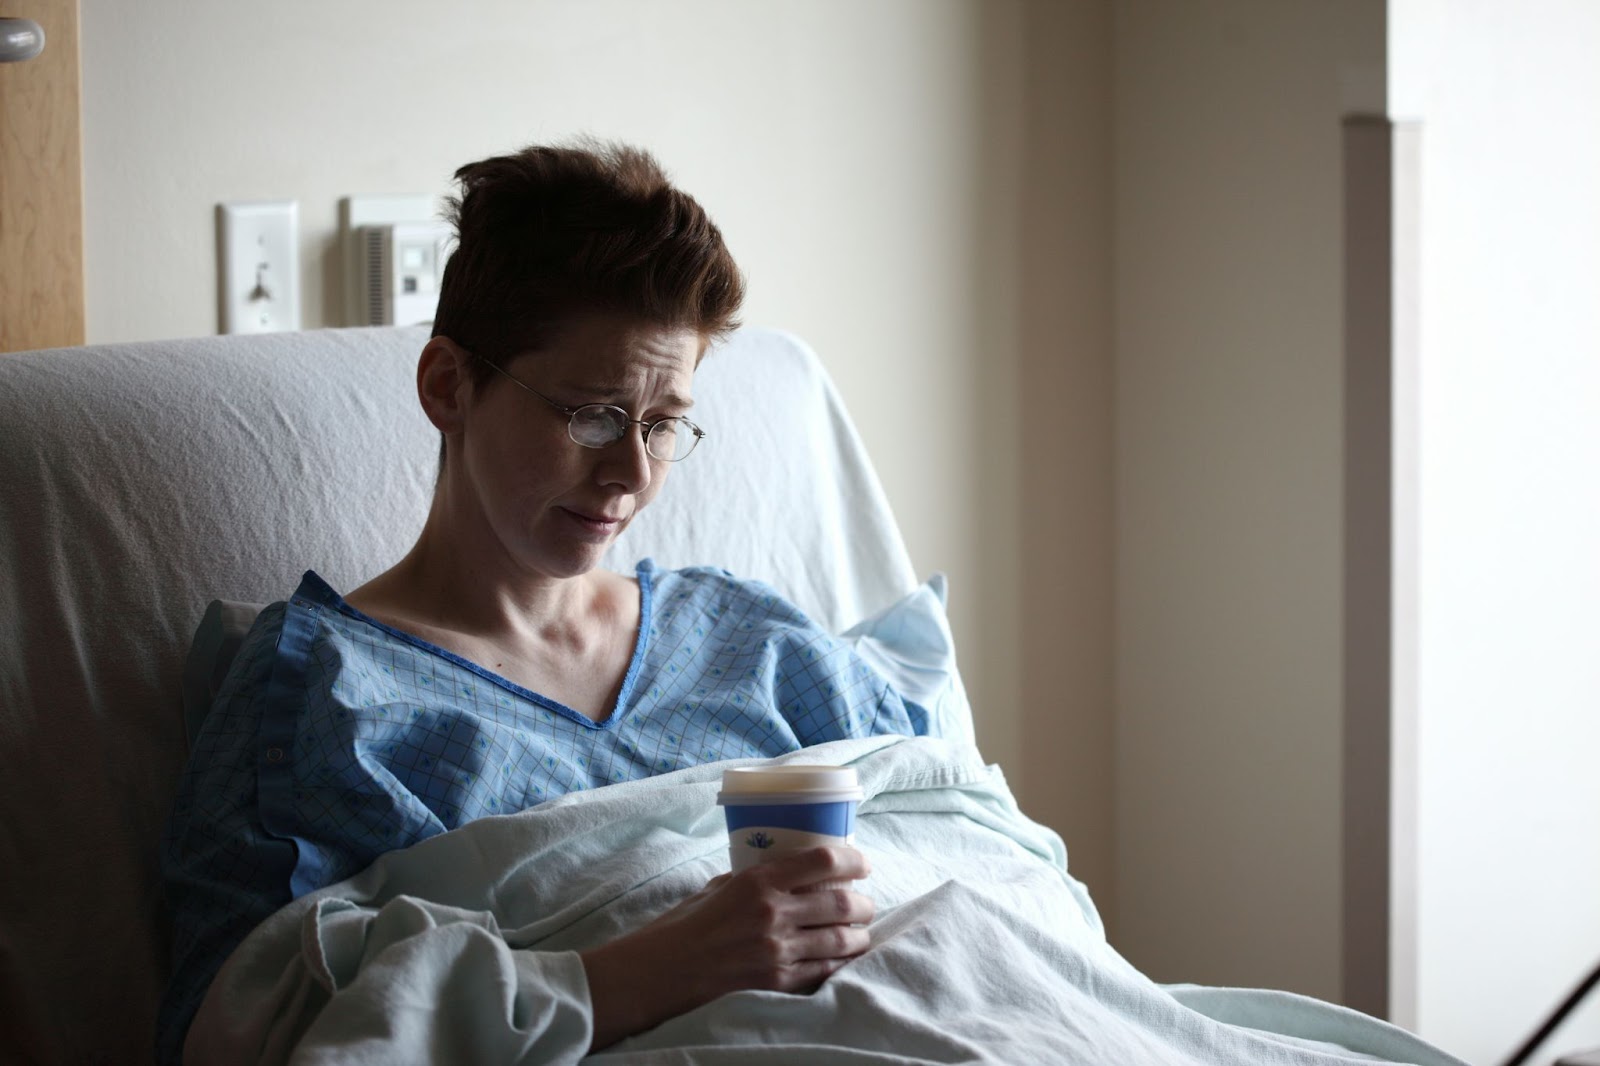 Patient on a hospital bed holding a cup of coffee, crying for her pain and suffering